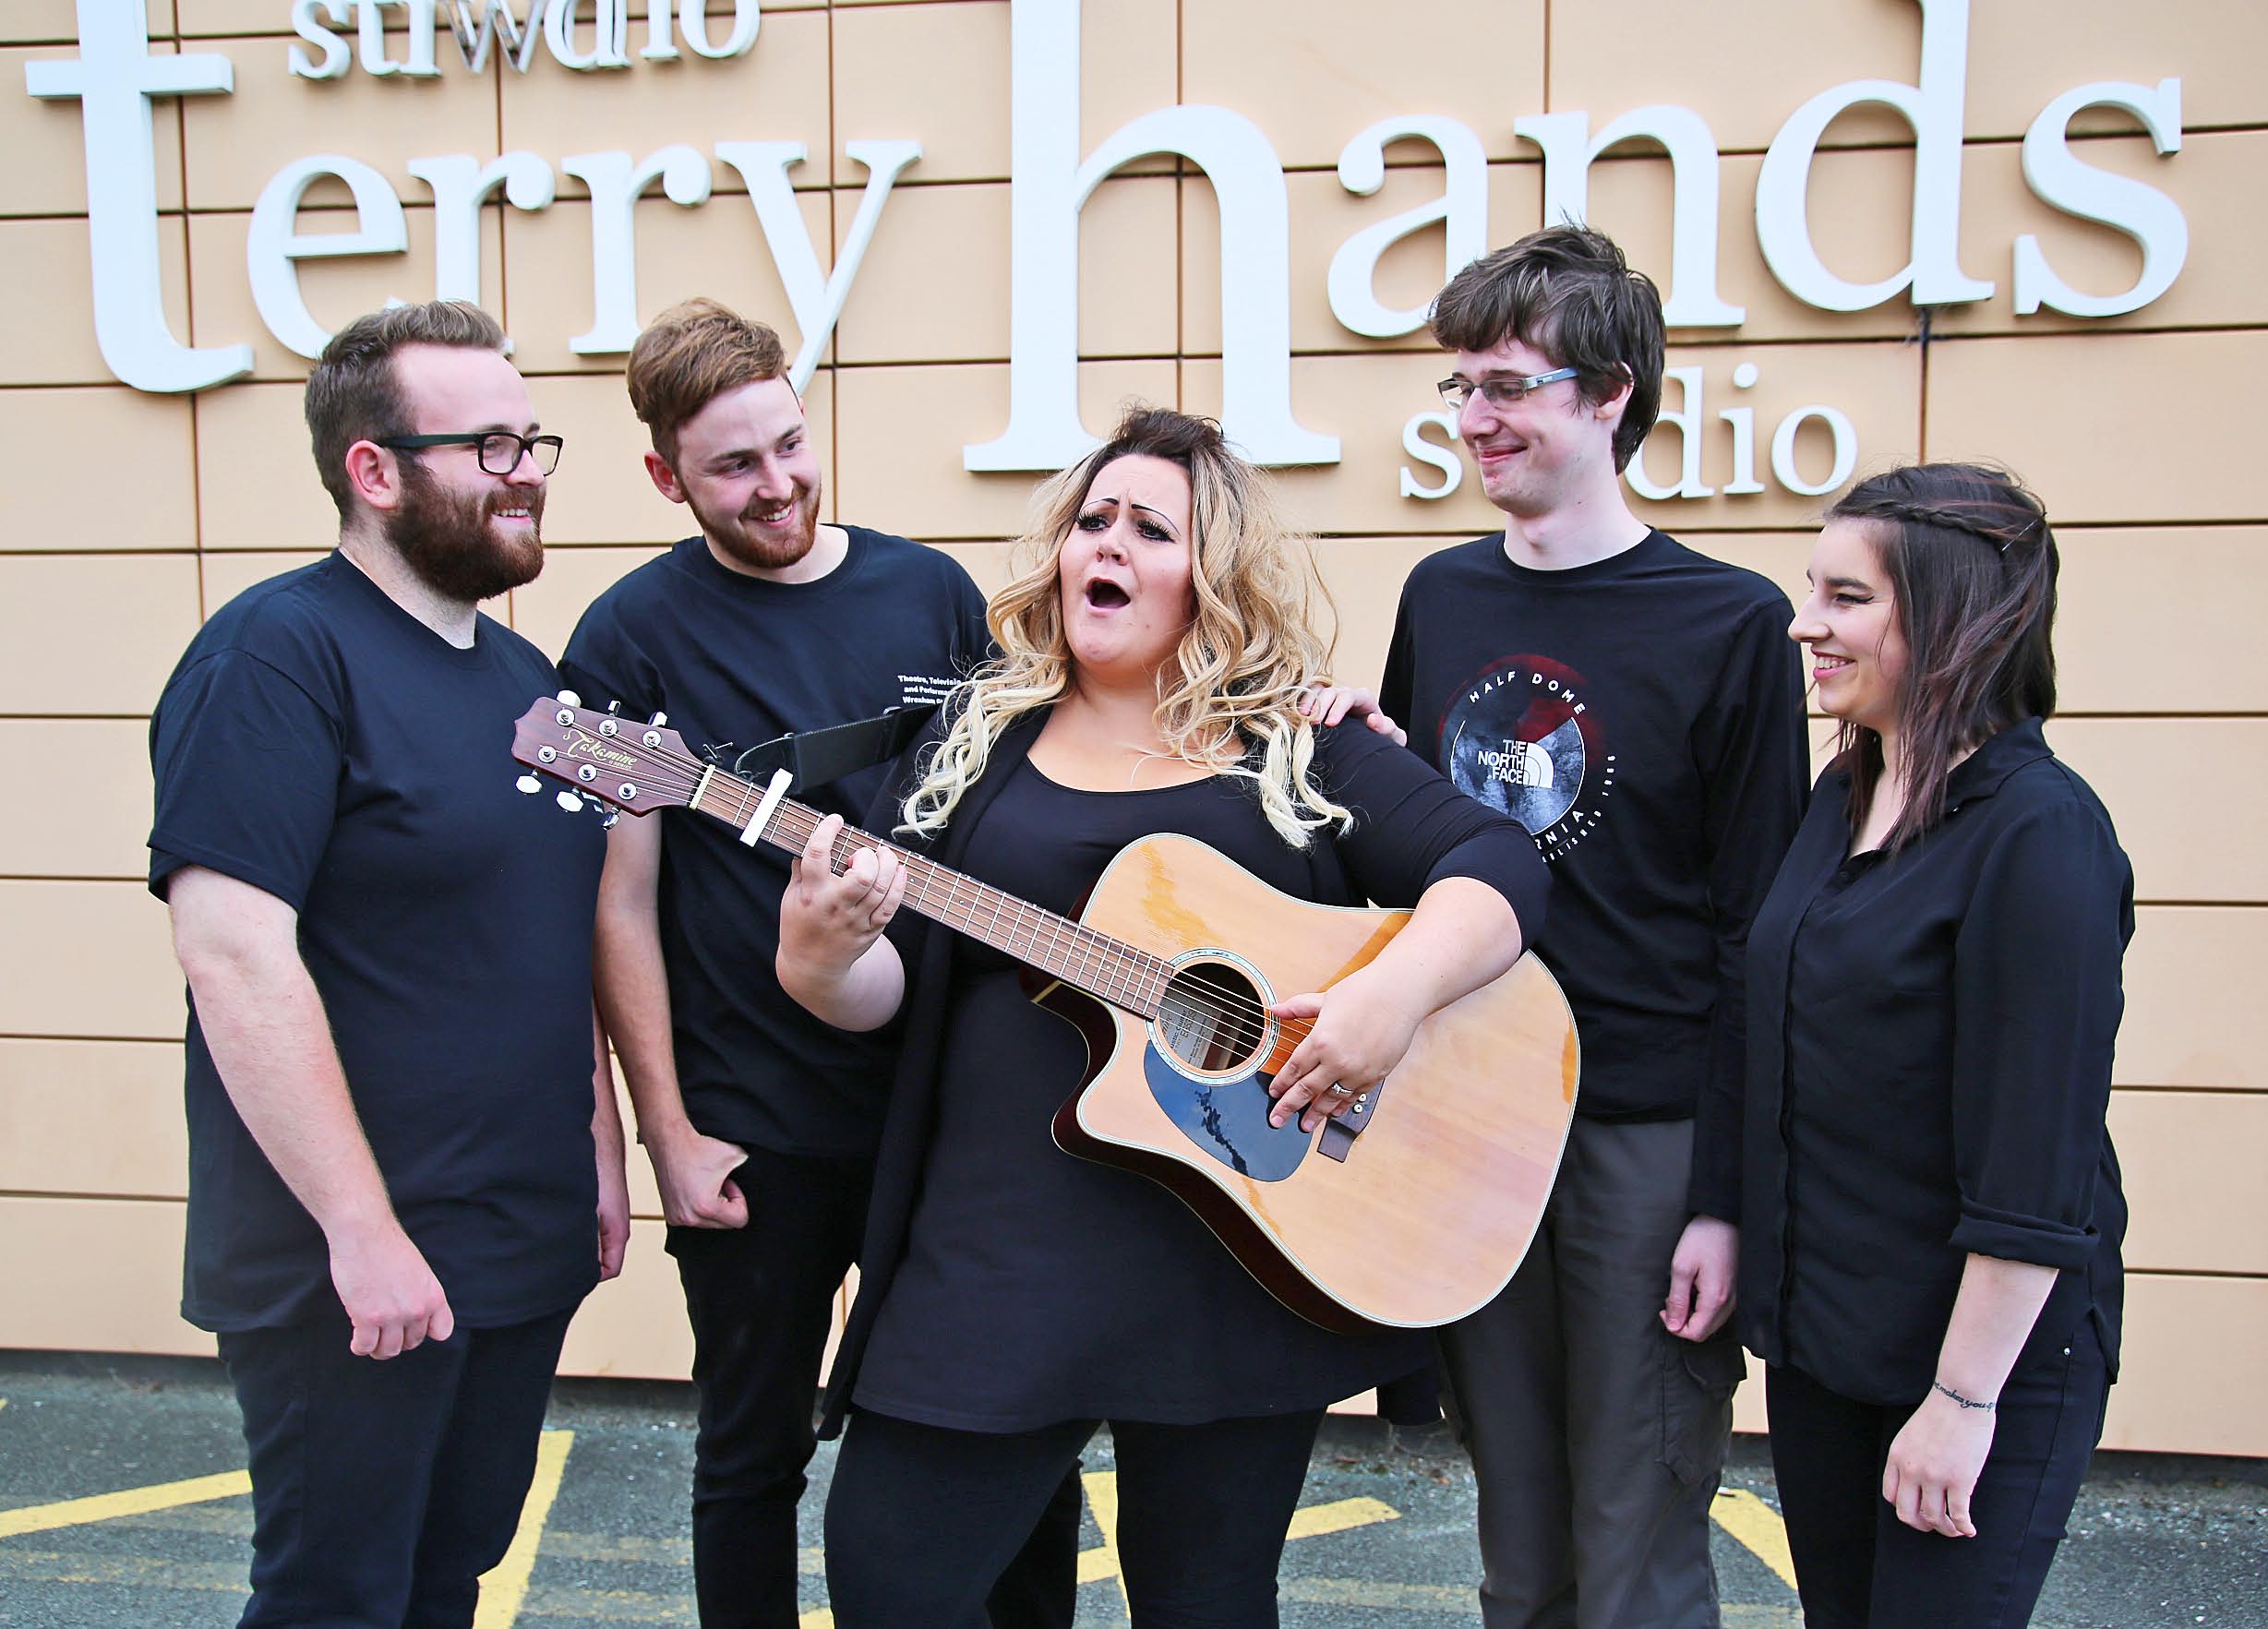 Singer-songwriter Sarah takes centre stage at student event